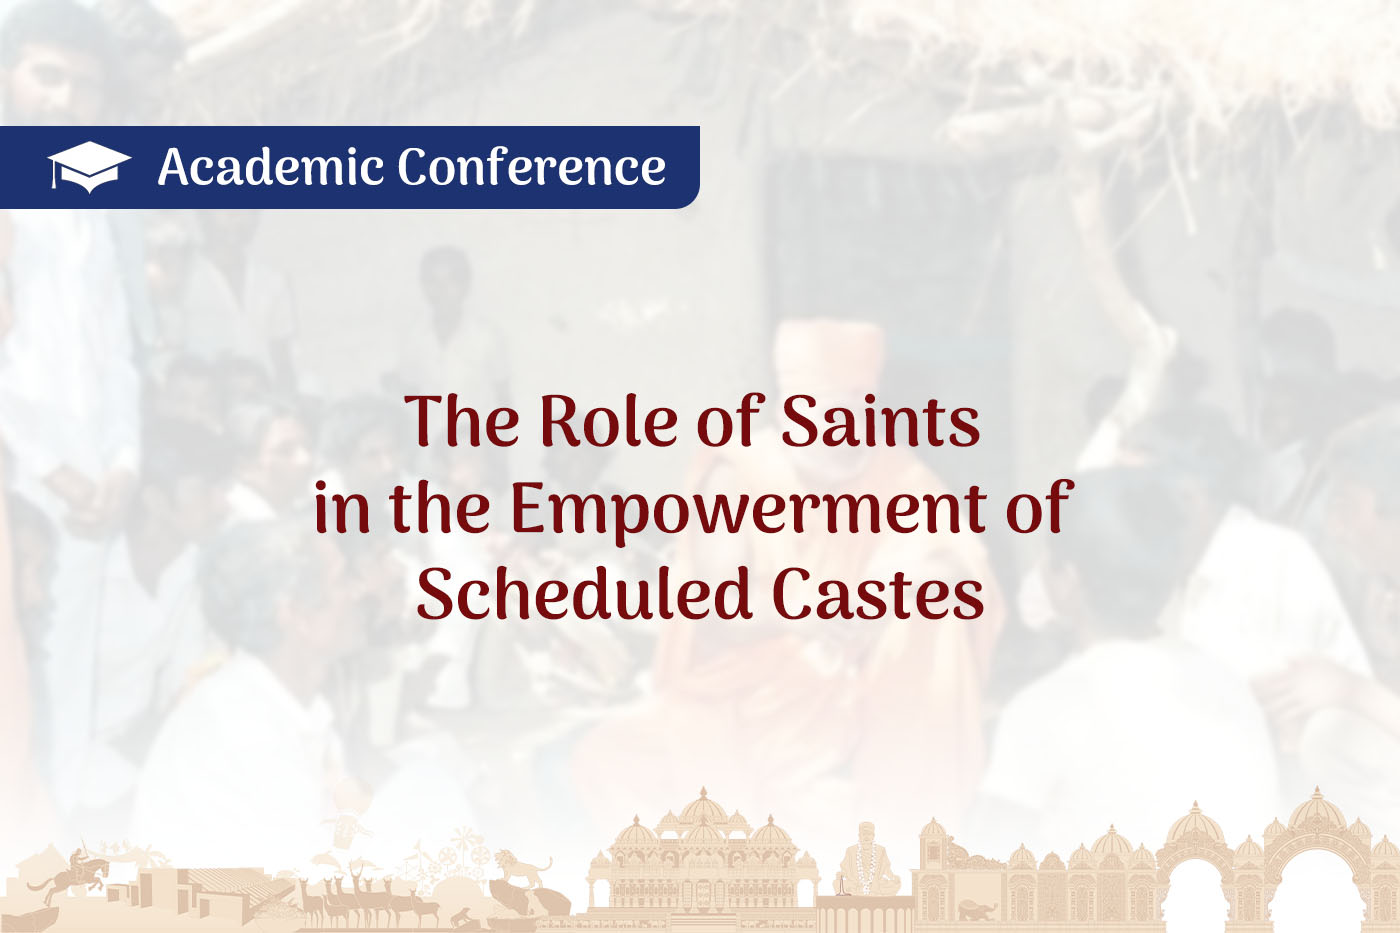 The Role of Saints in the Empowerment of Scheduled Castes